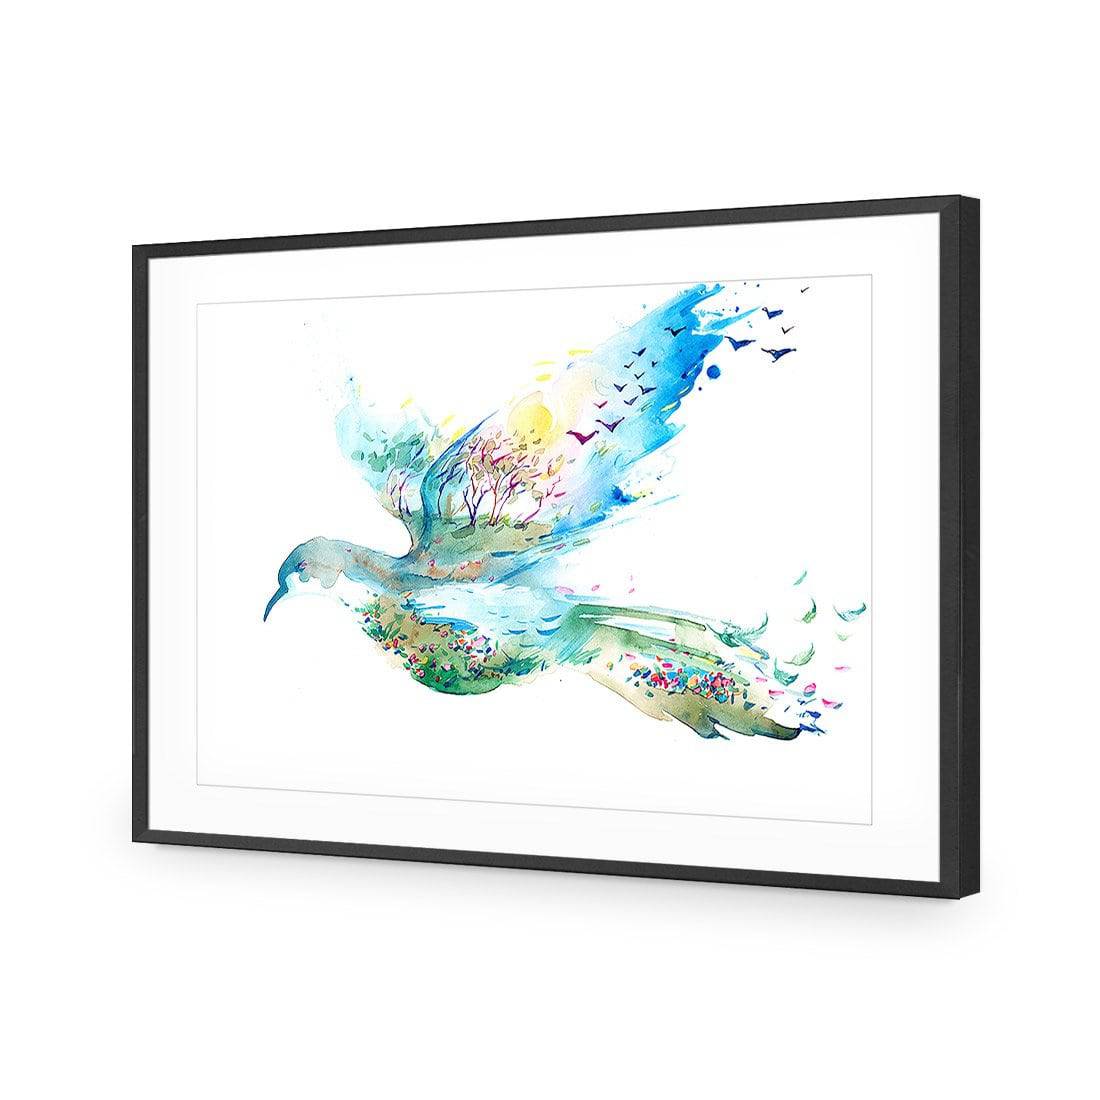 Dove Of Peace-Acrylic-Wall Art Design-With Border-Acrylic - Black Frame-45x30cm-Wall Art Designs